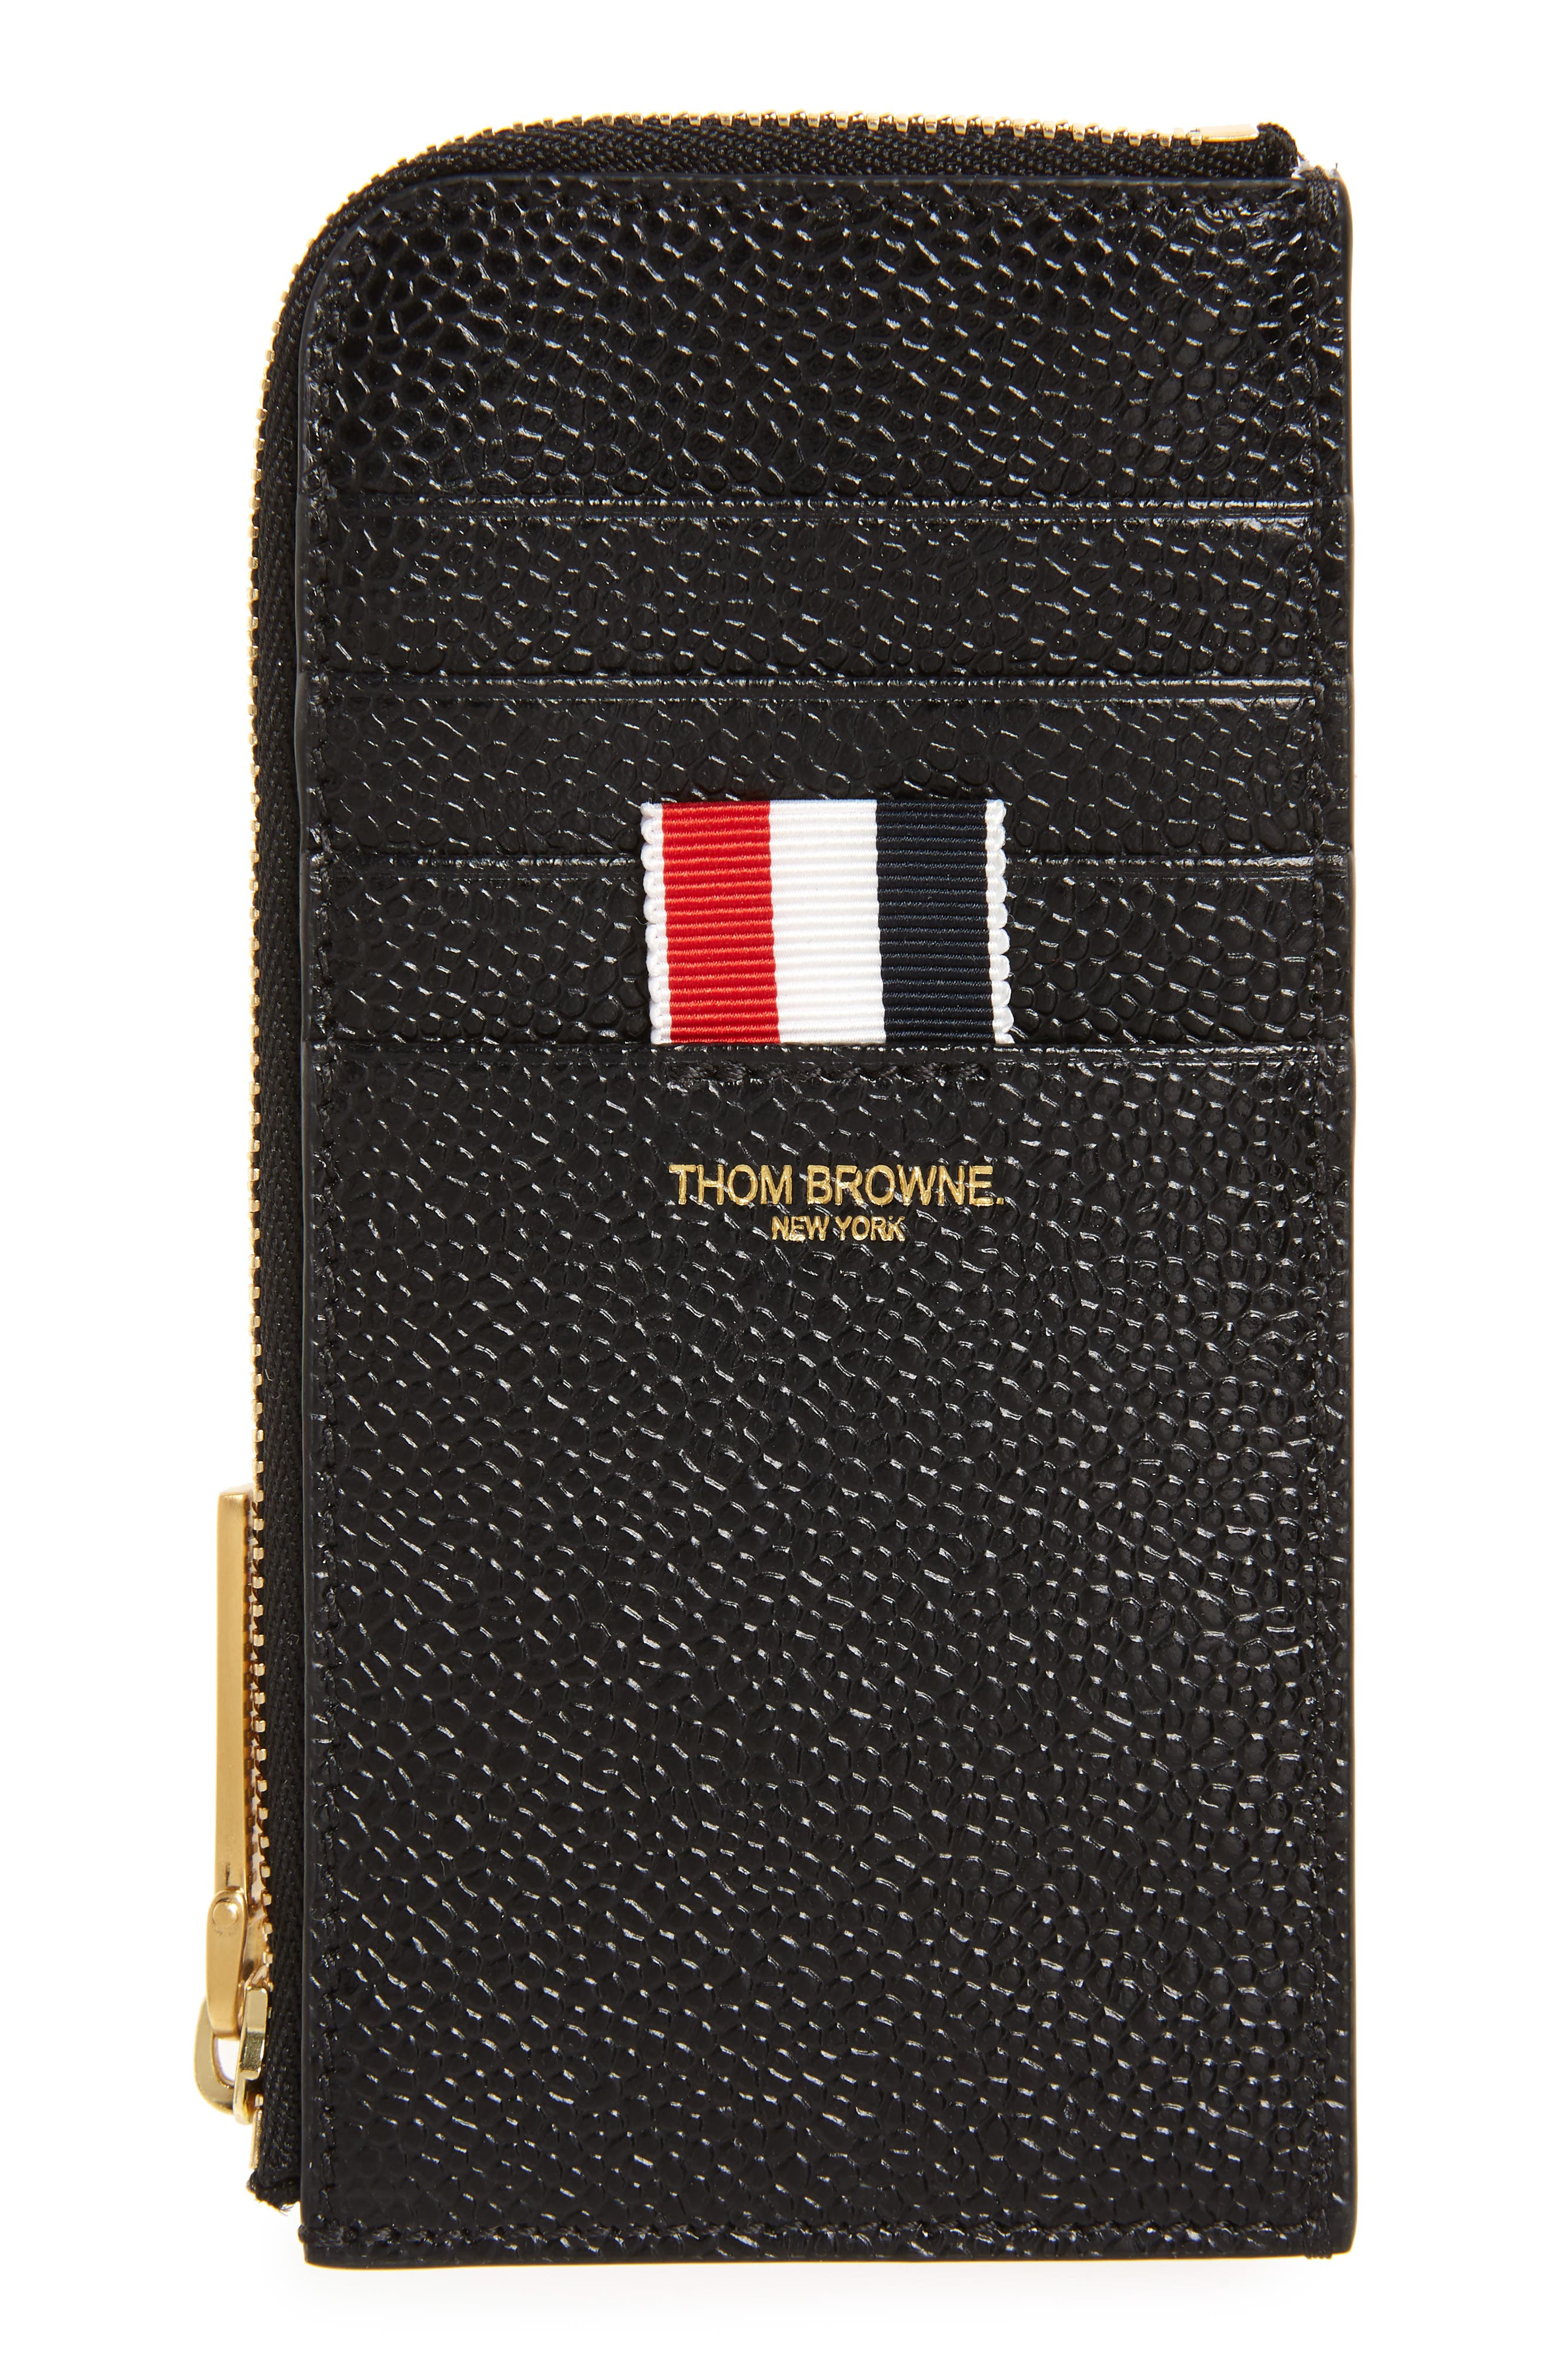 Thom Browne Leather Mini Pouch in Black for Men Mens Accessories Wallets and cardholders 